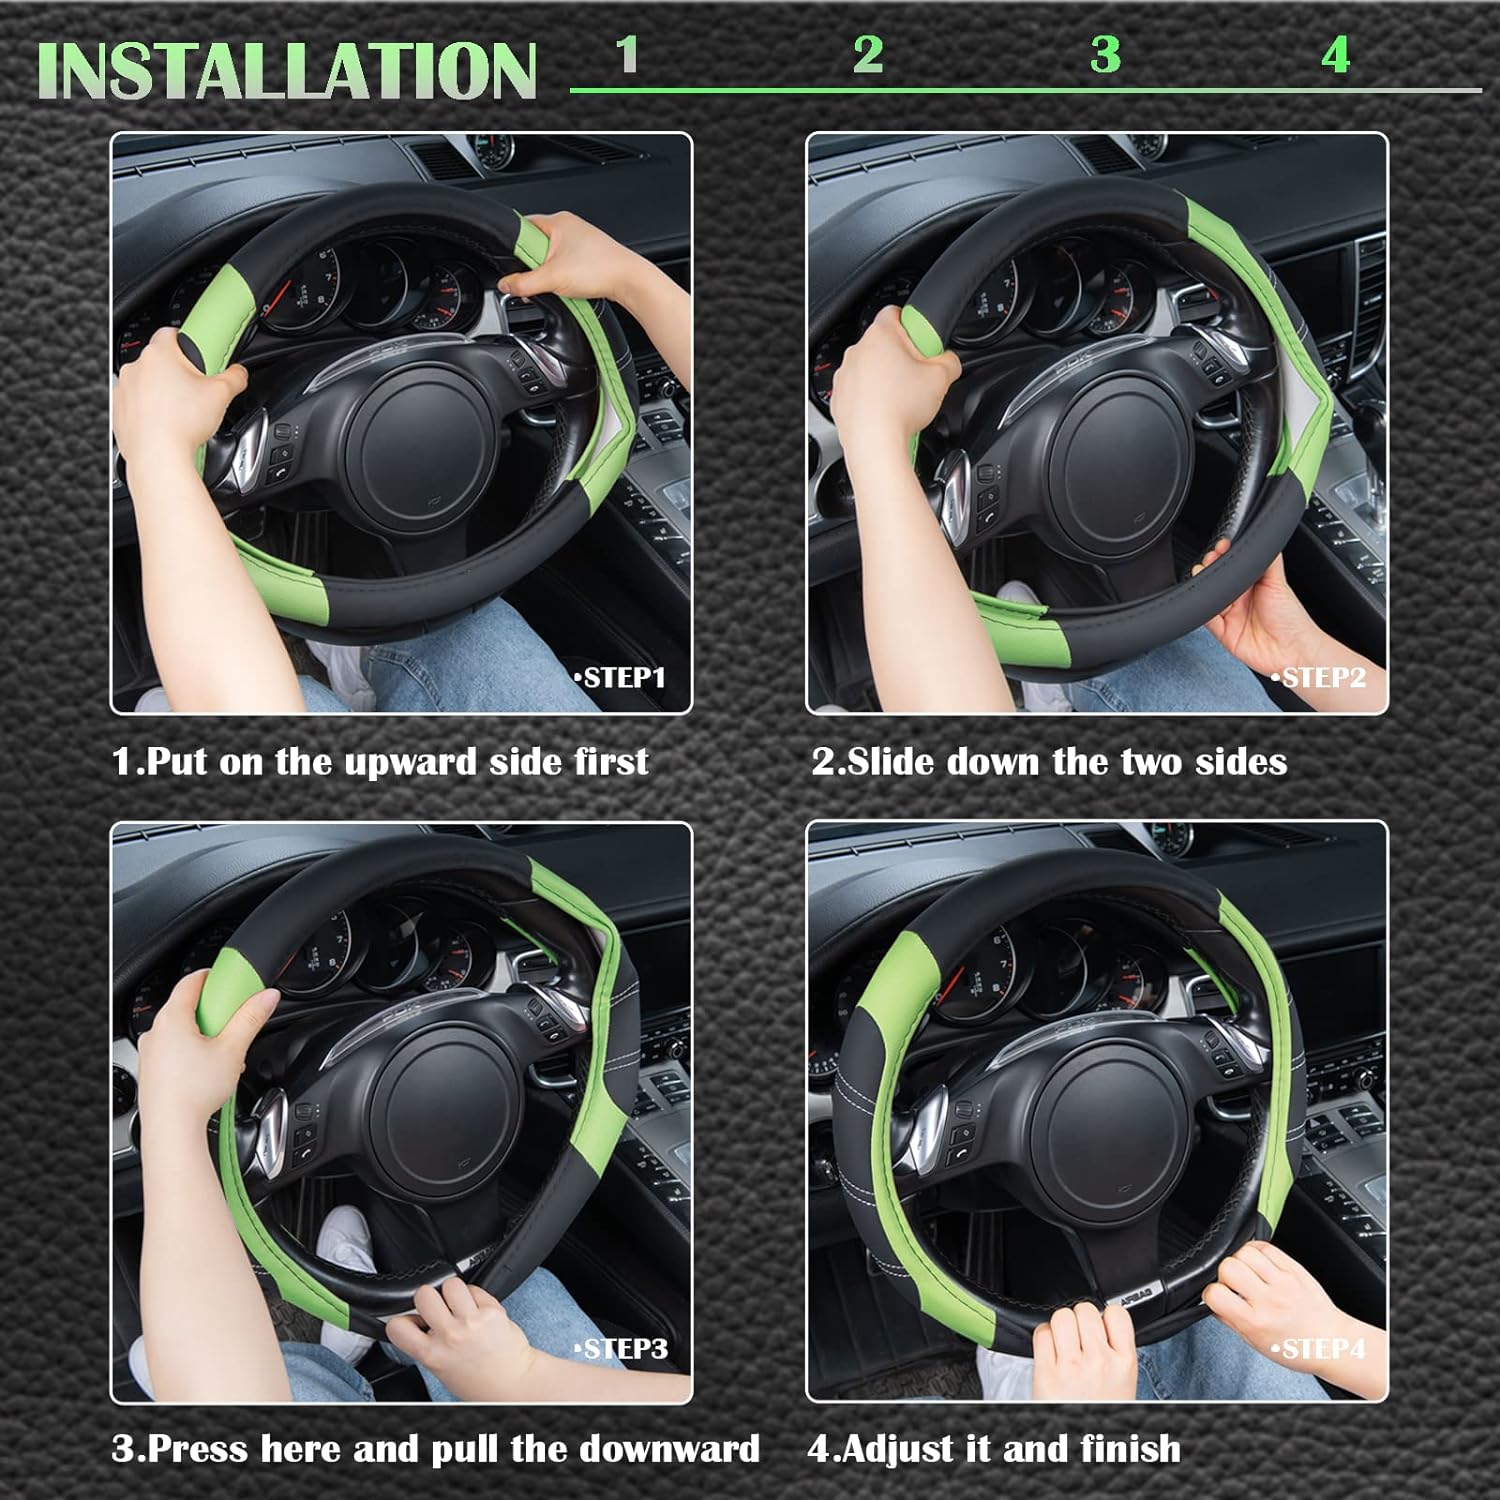 CAR PASS Steering Wheel Cover and Heavy Duty Leather Seat Cover Combo, Waterproof Automotive Seat Cover Fit for Most Sedans, SUV, Pick-Up, Truck.Black and Green